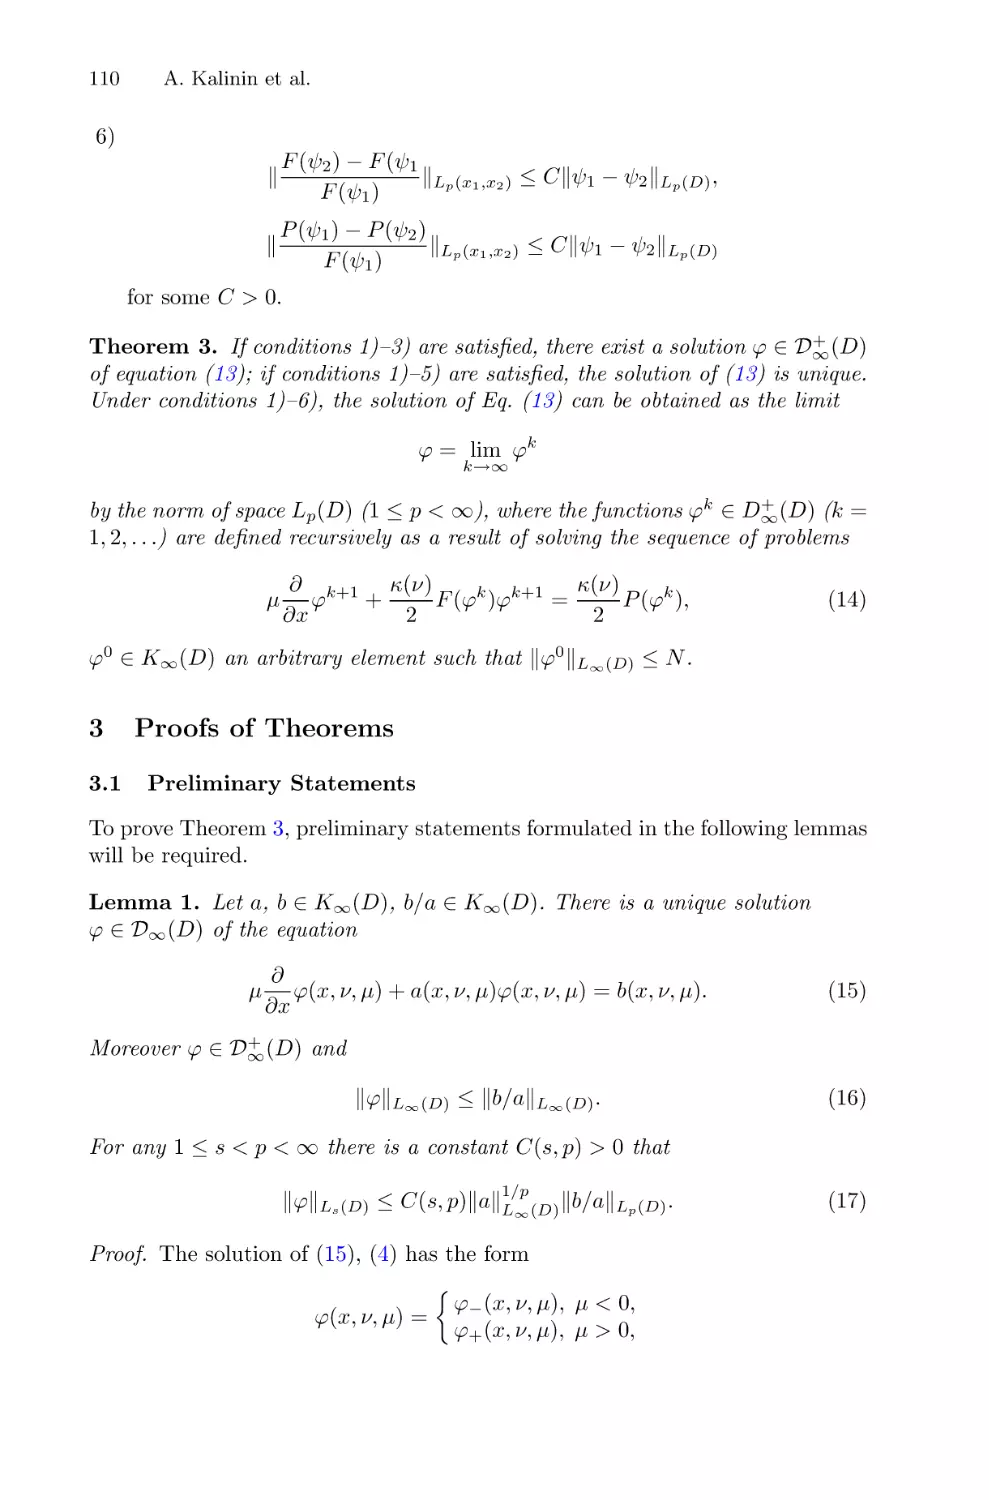 3 Proofs of Theorems
3.1 Preliminary Statements